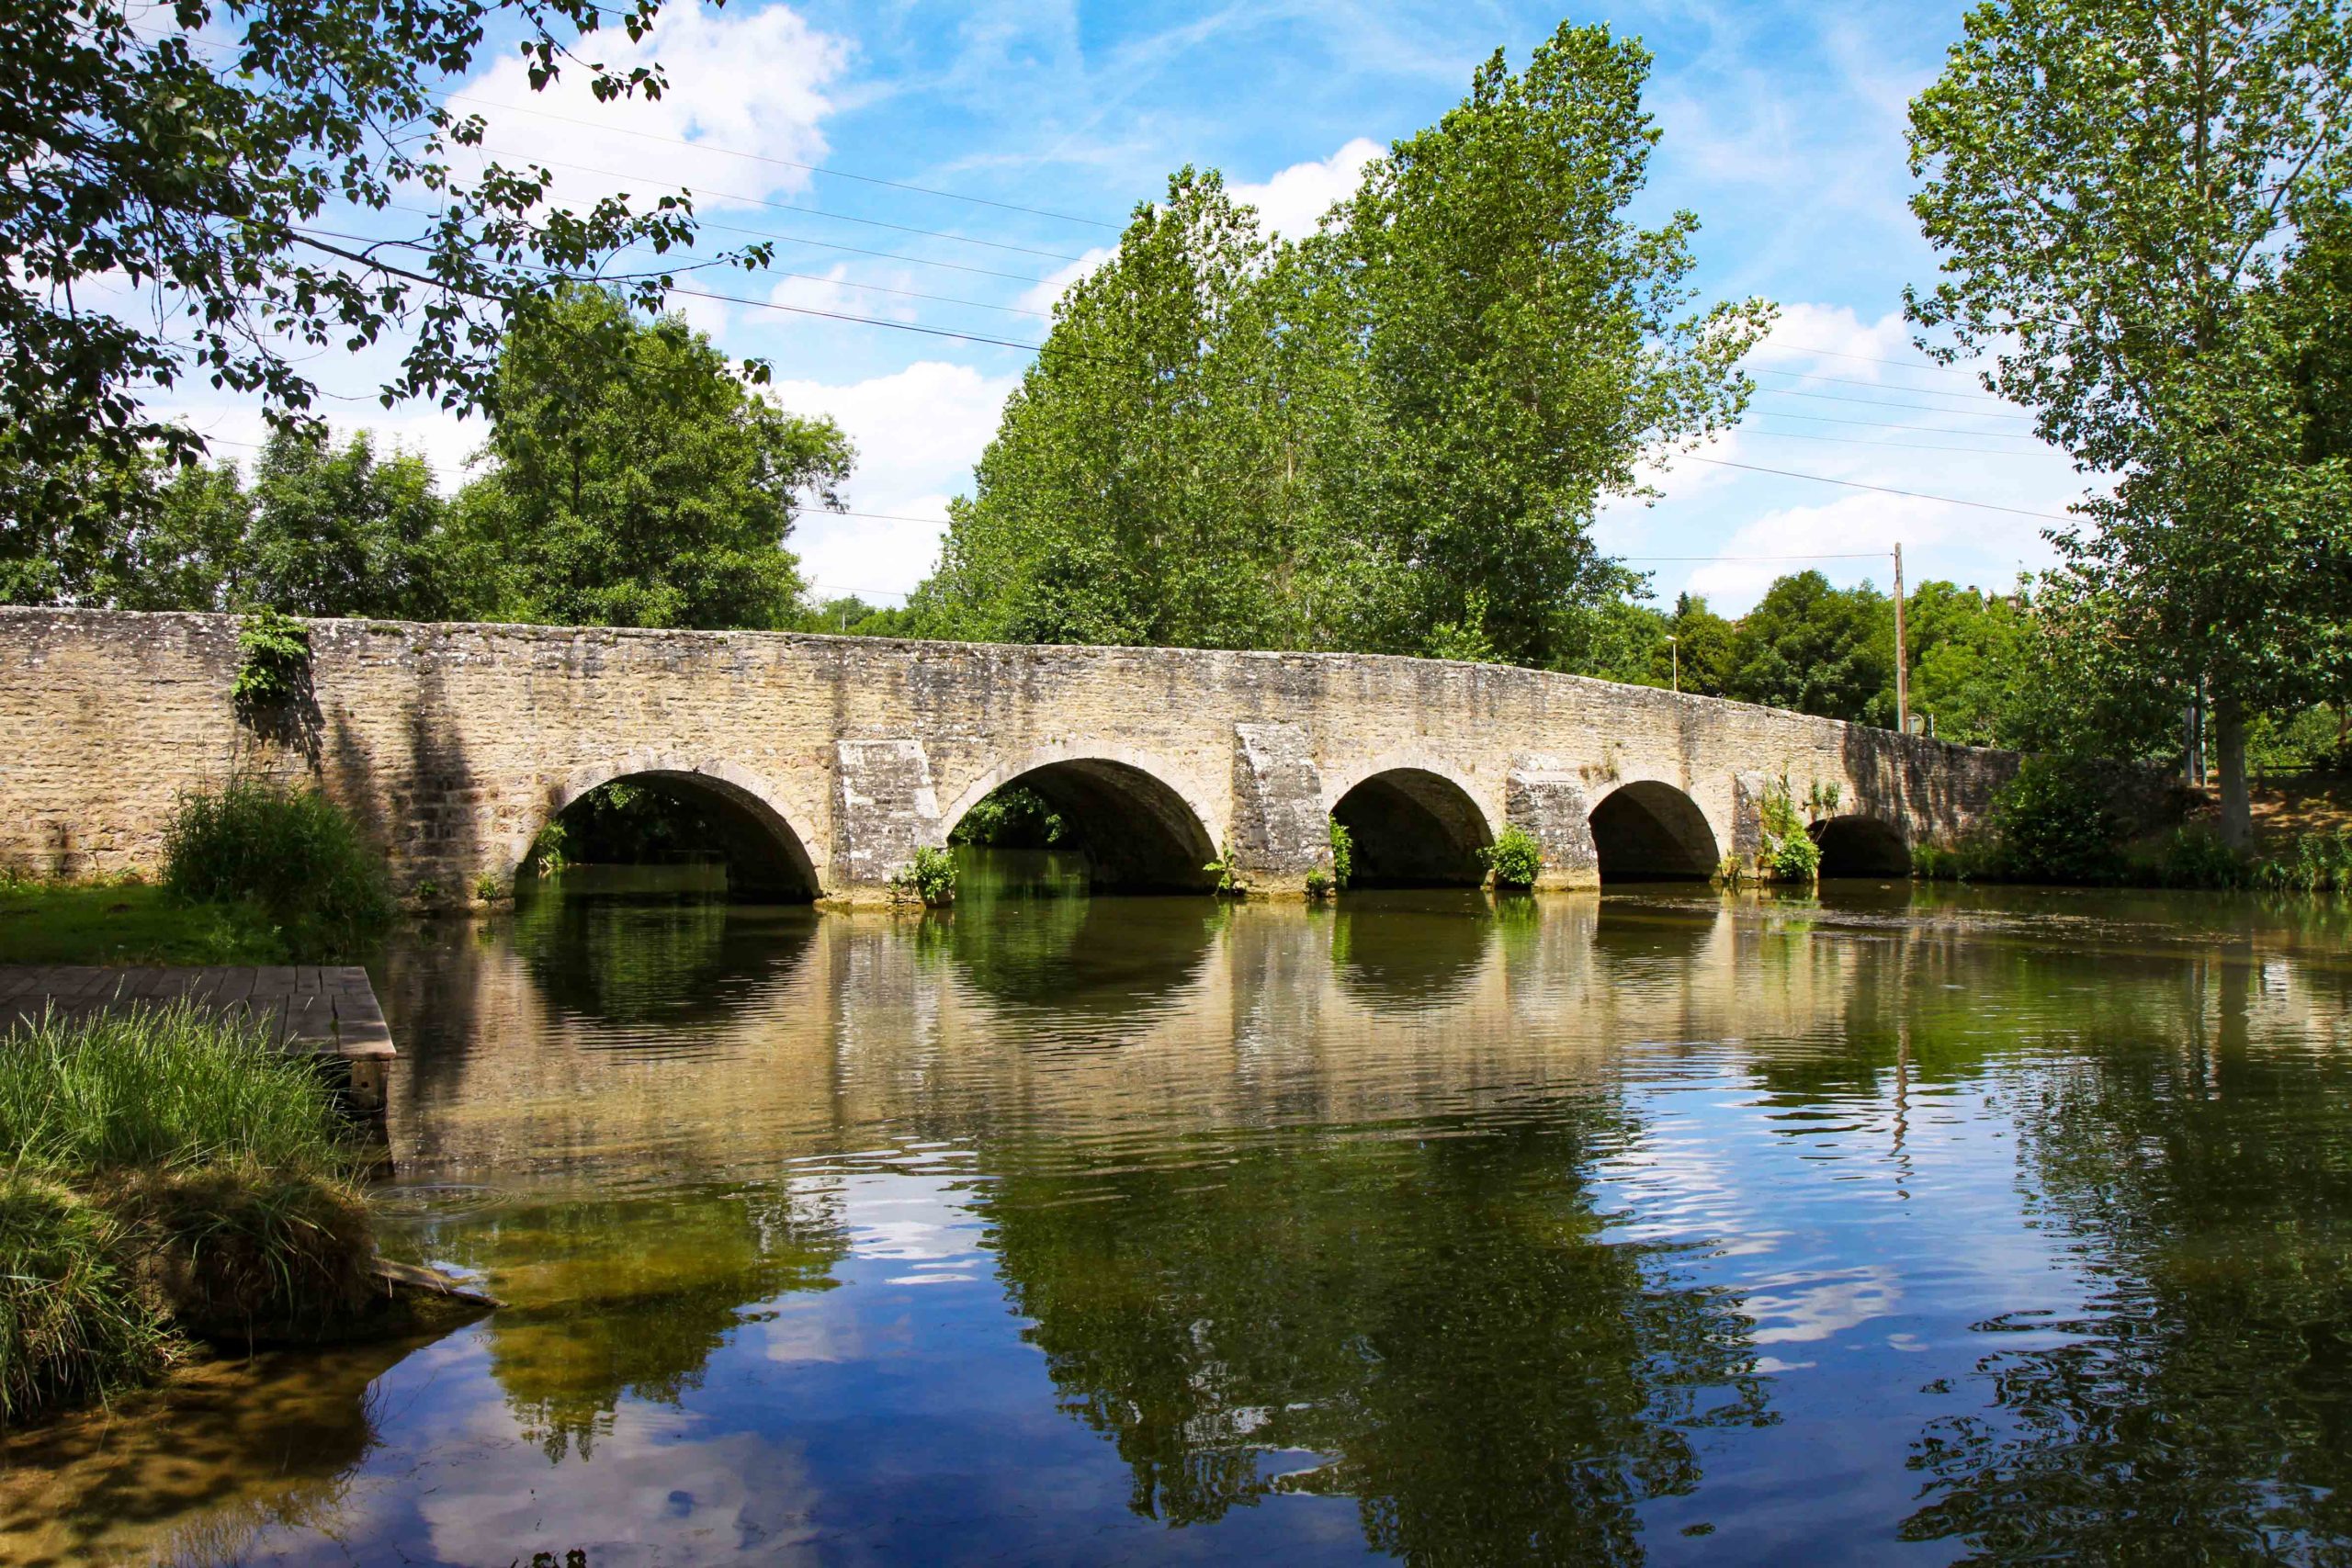 The bridge of Sainte-Marie-sur-Ouche © Thesupermat - licence [CC BY-SA 3.0] from Wikimedia Commons